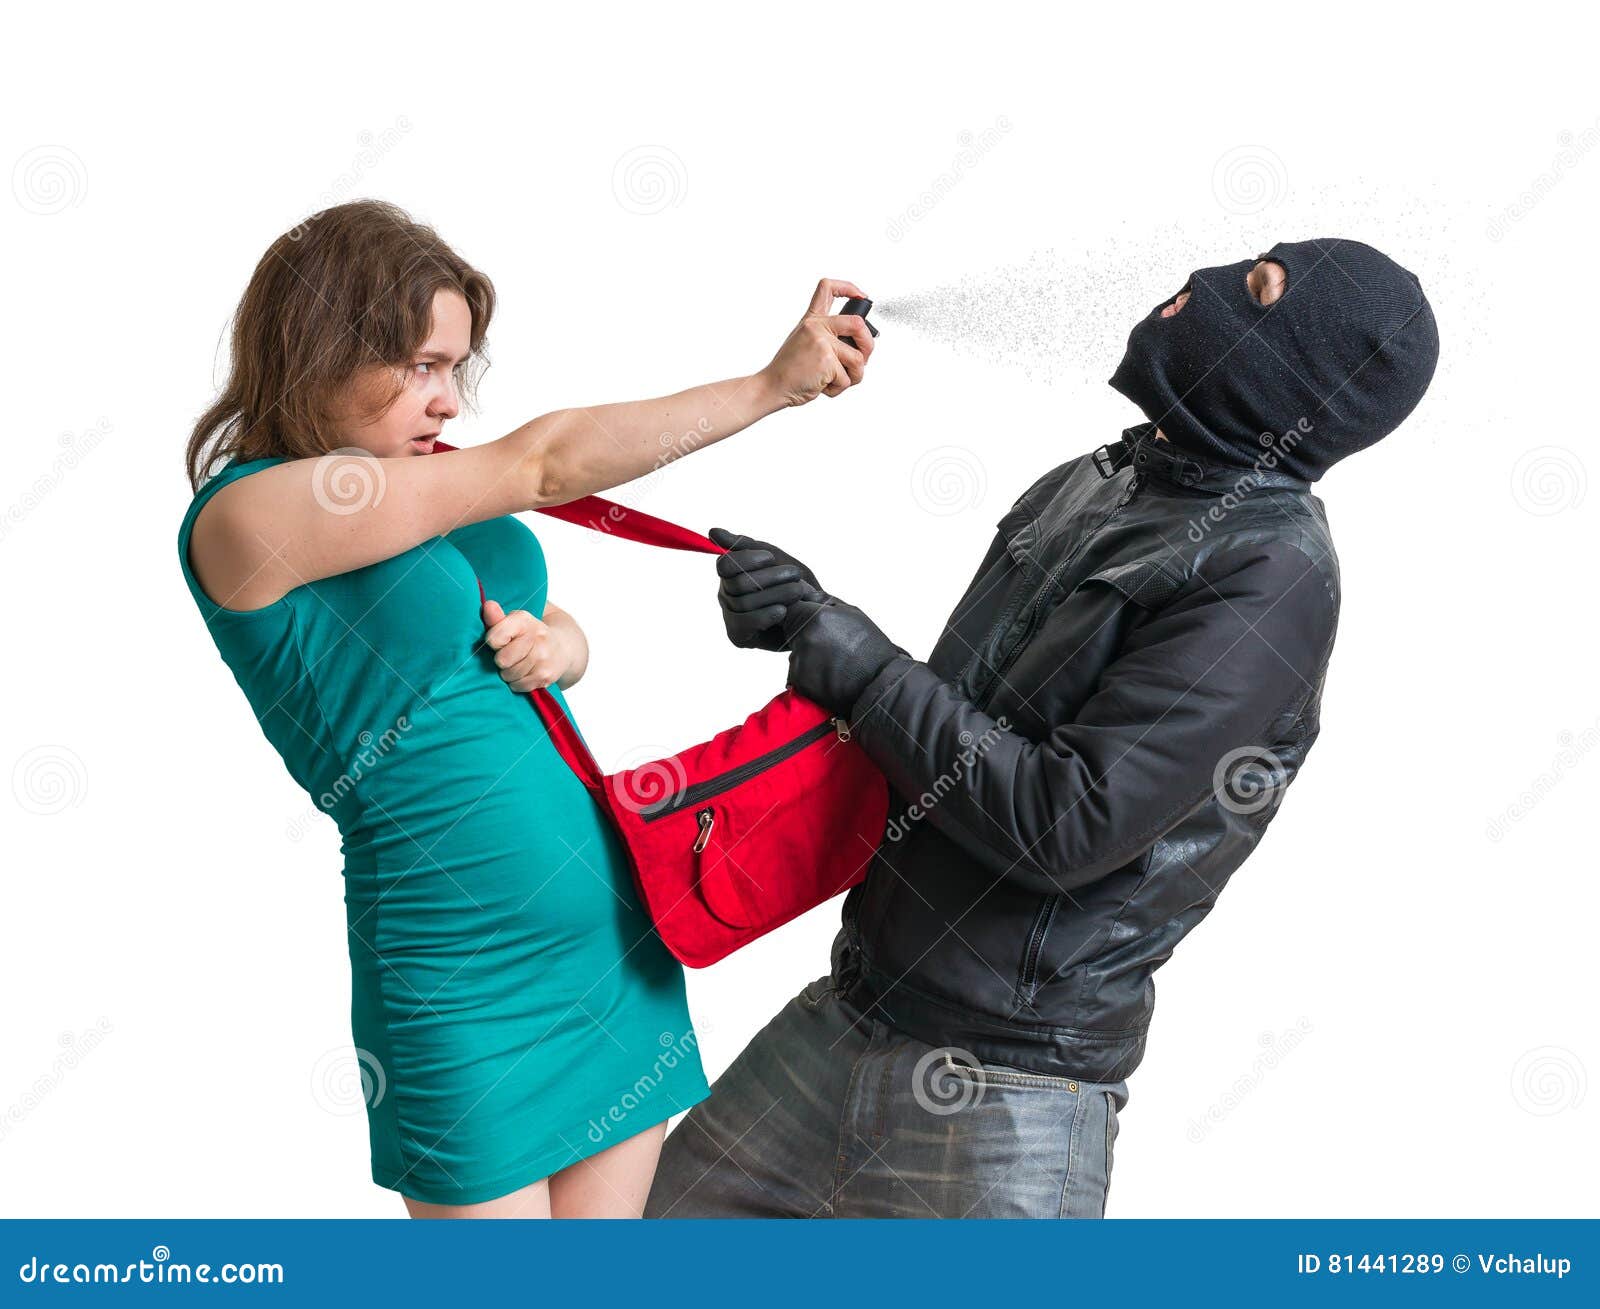 self defense concept. young woman is defending with pepper spray.